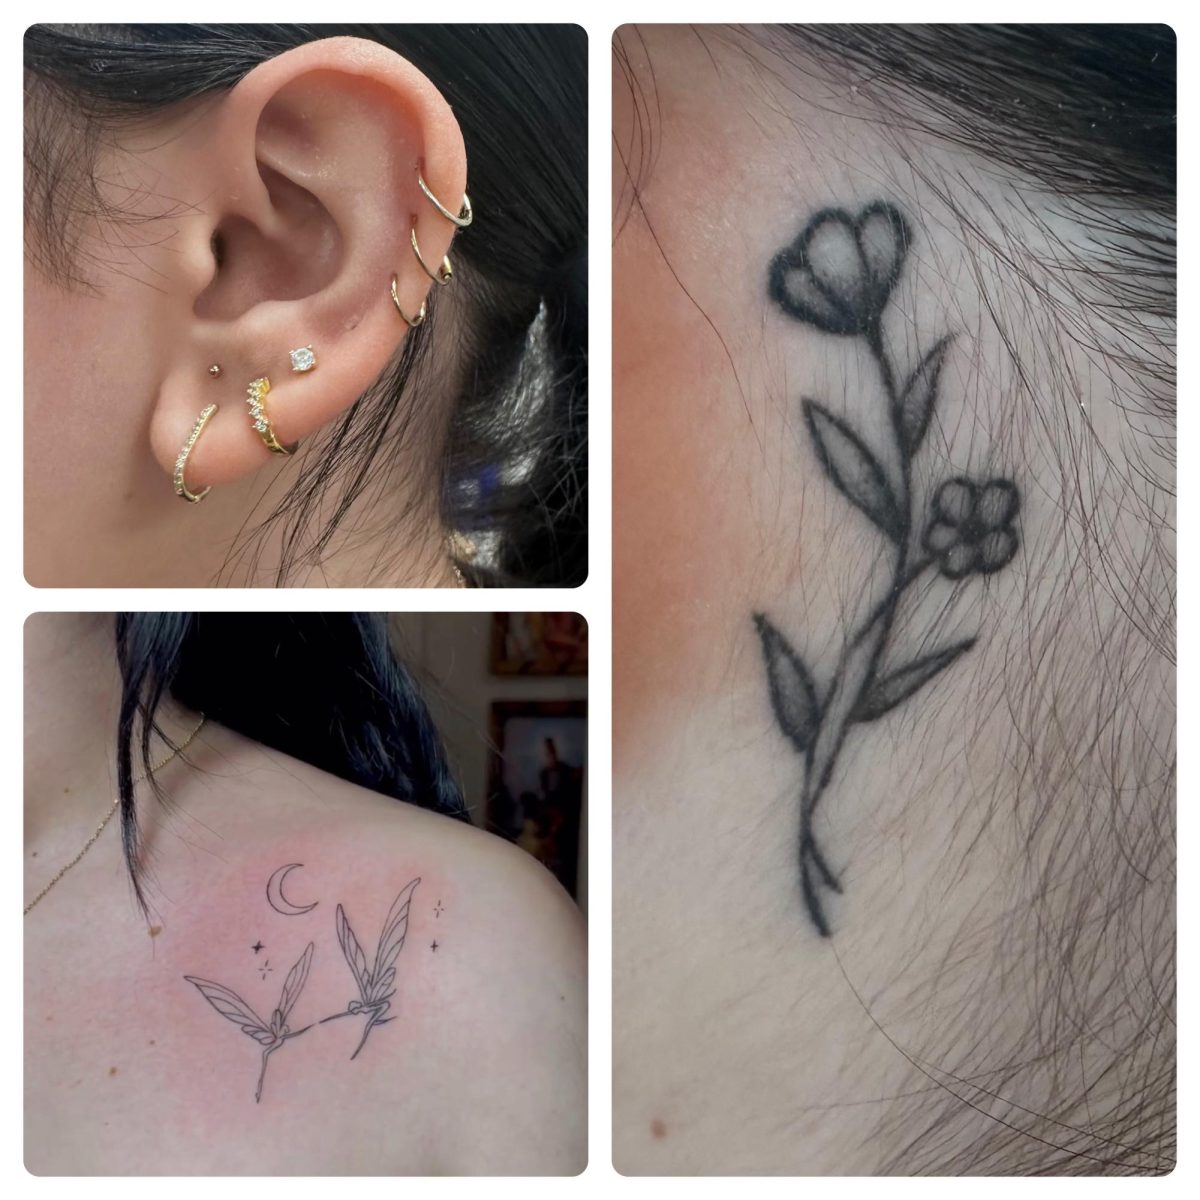 Examples of my piercings and tattoos. 